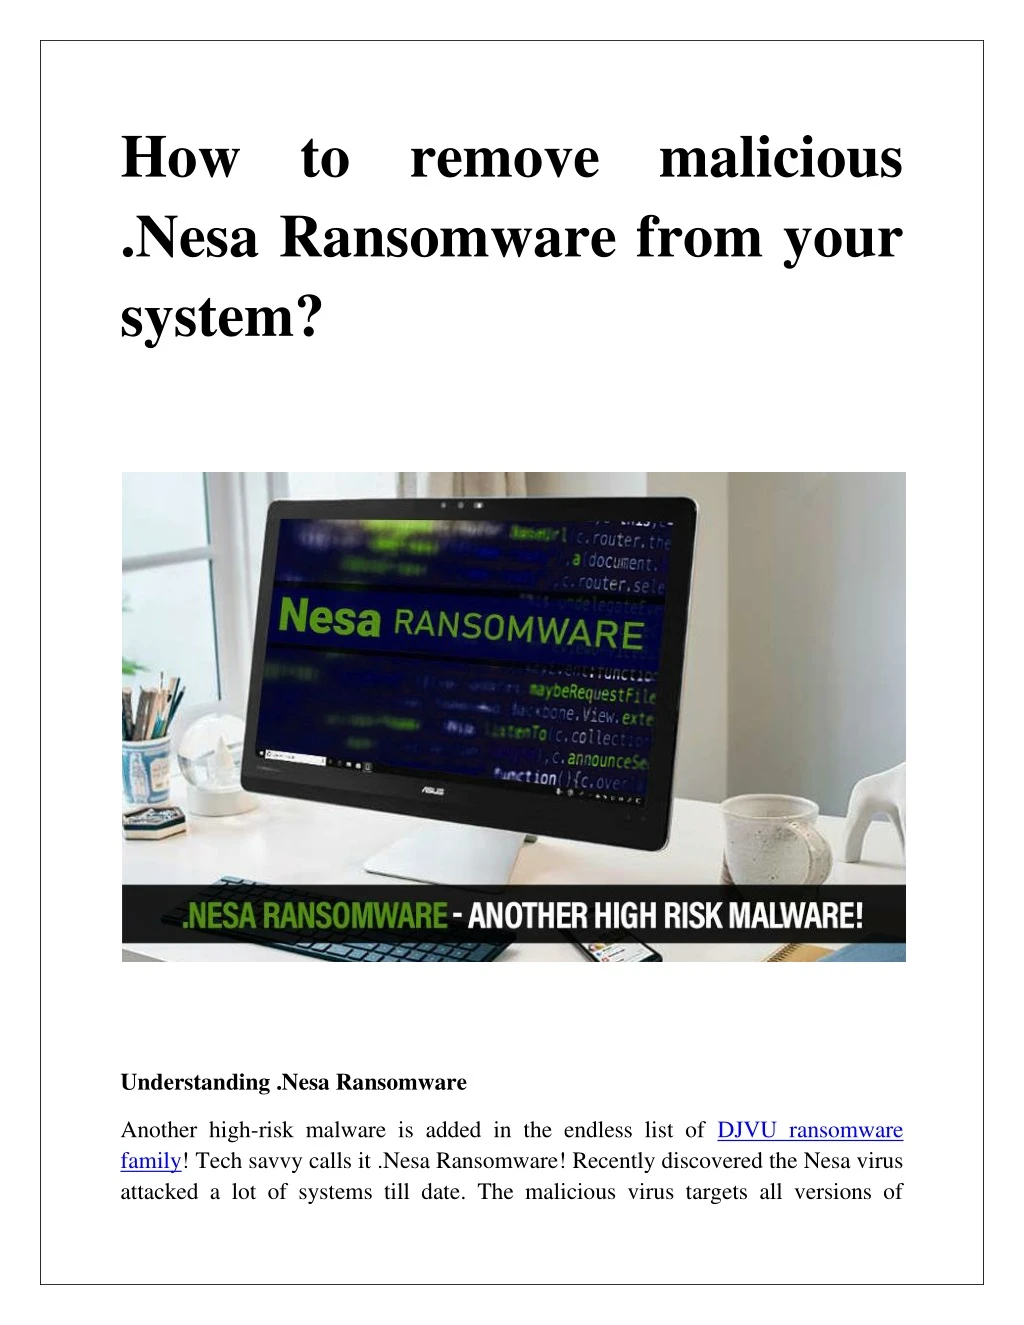 how to remove malicious nesa ransomware from your